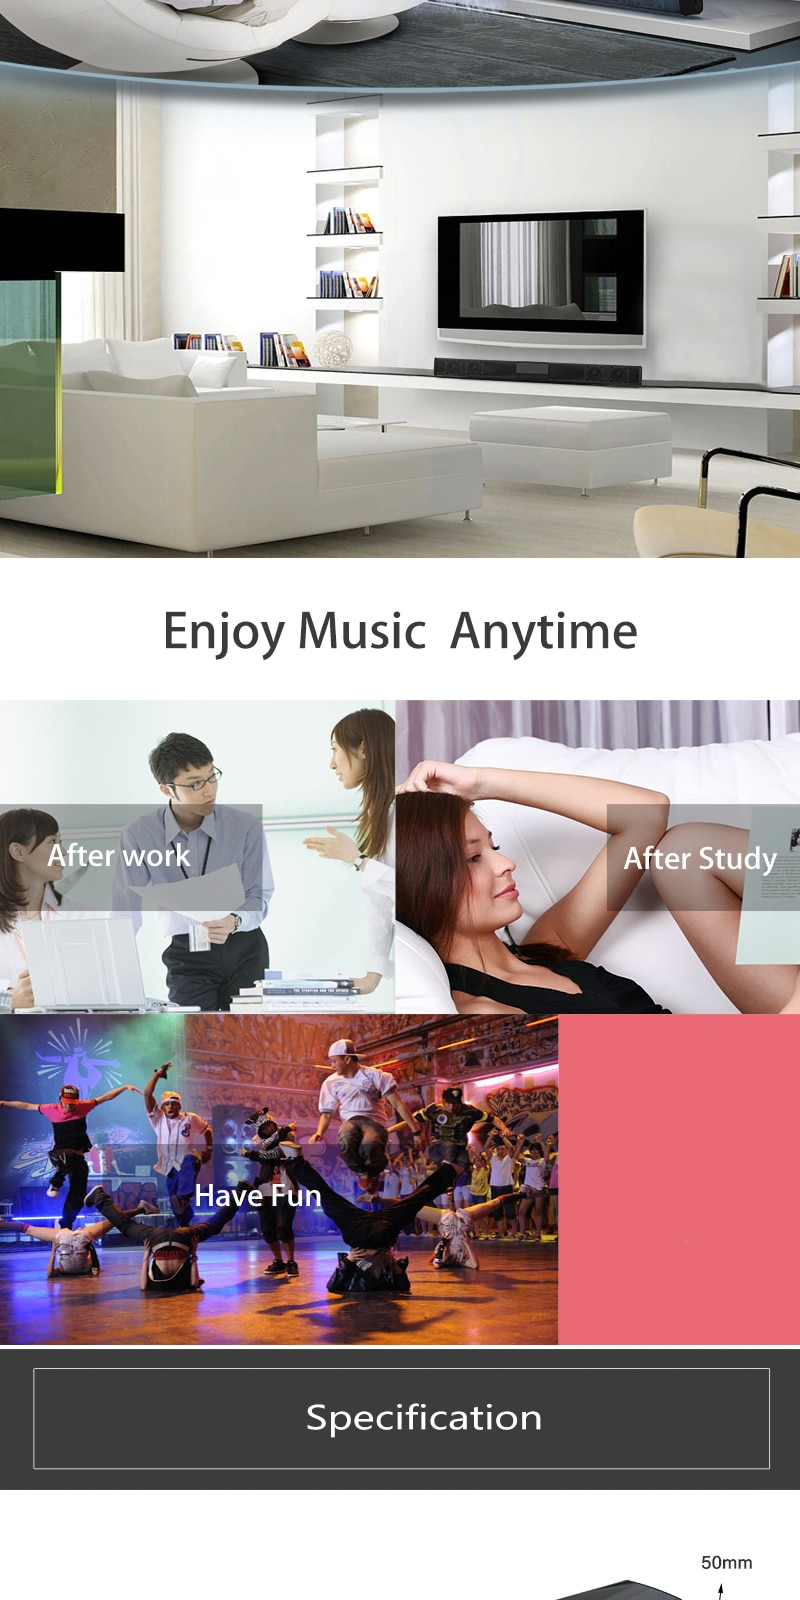 Home theater HIFI Portable Wireless Bluetooth Speakers column Stereo Bass Sound bar FM Radio USB Subwoofer for Computer TV Phone